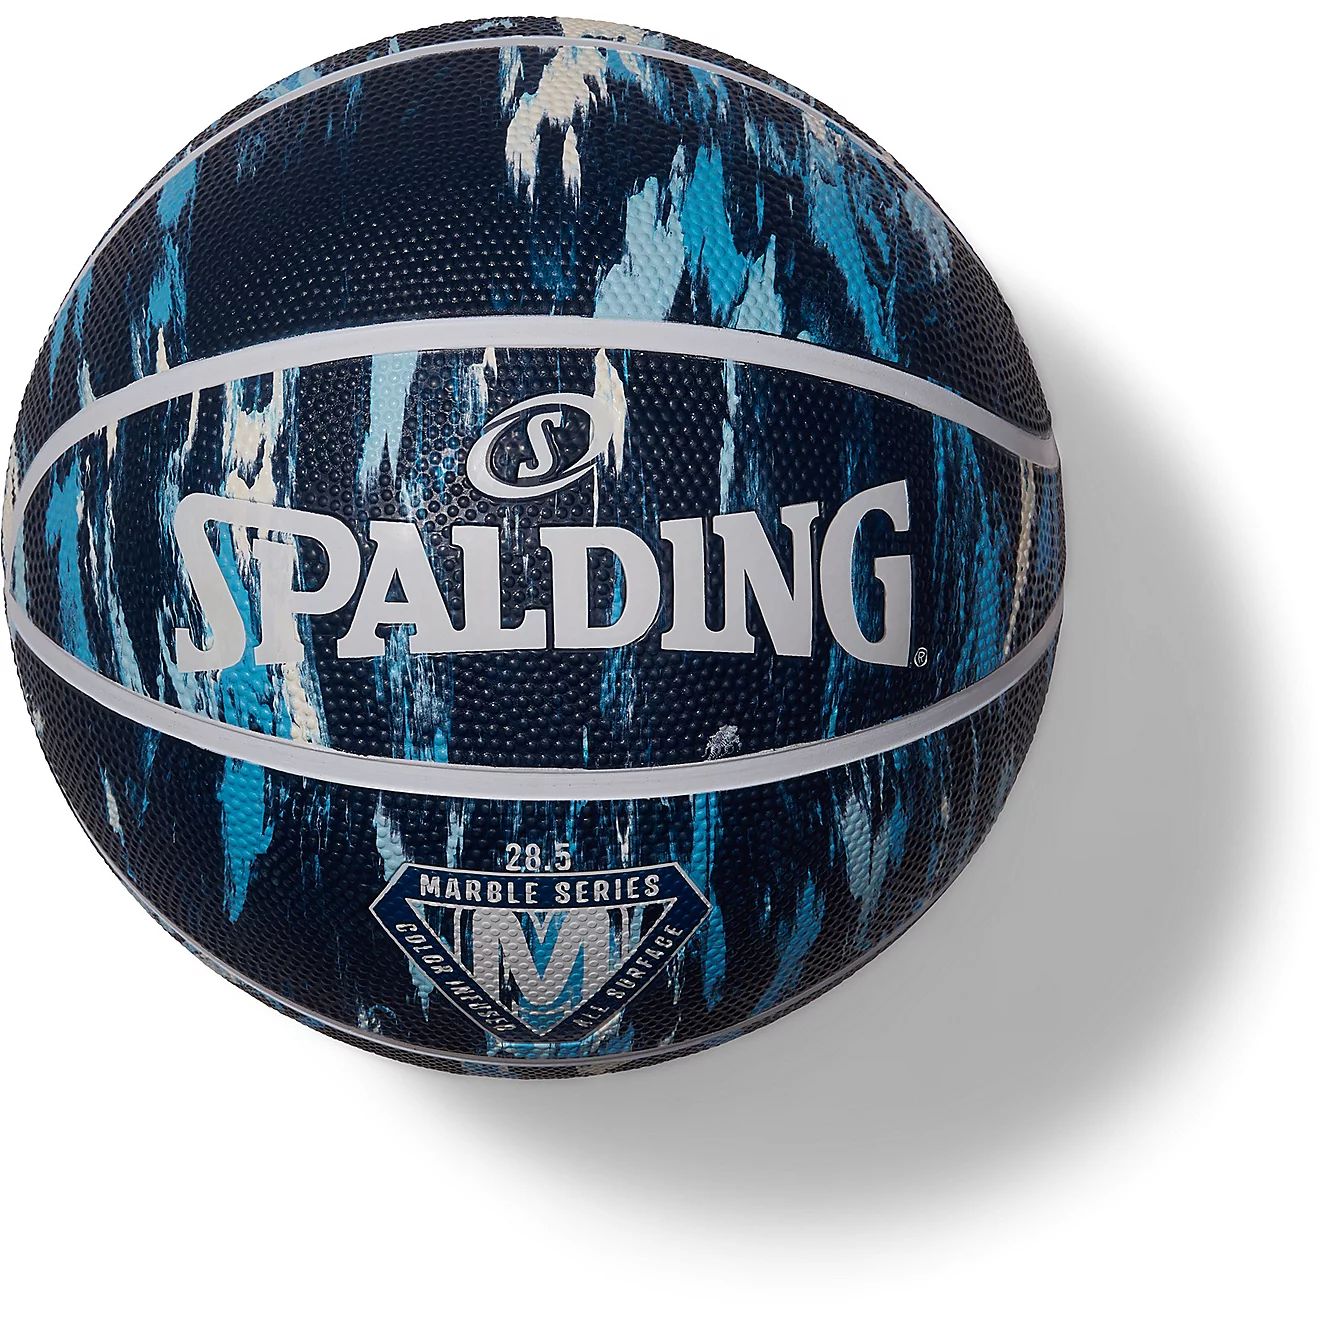 Spalding Marble Series Outdoor Basketball | Academy | Academy Sports + Outdoors